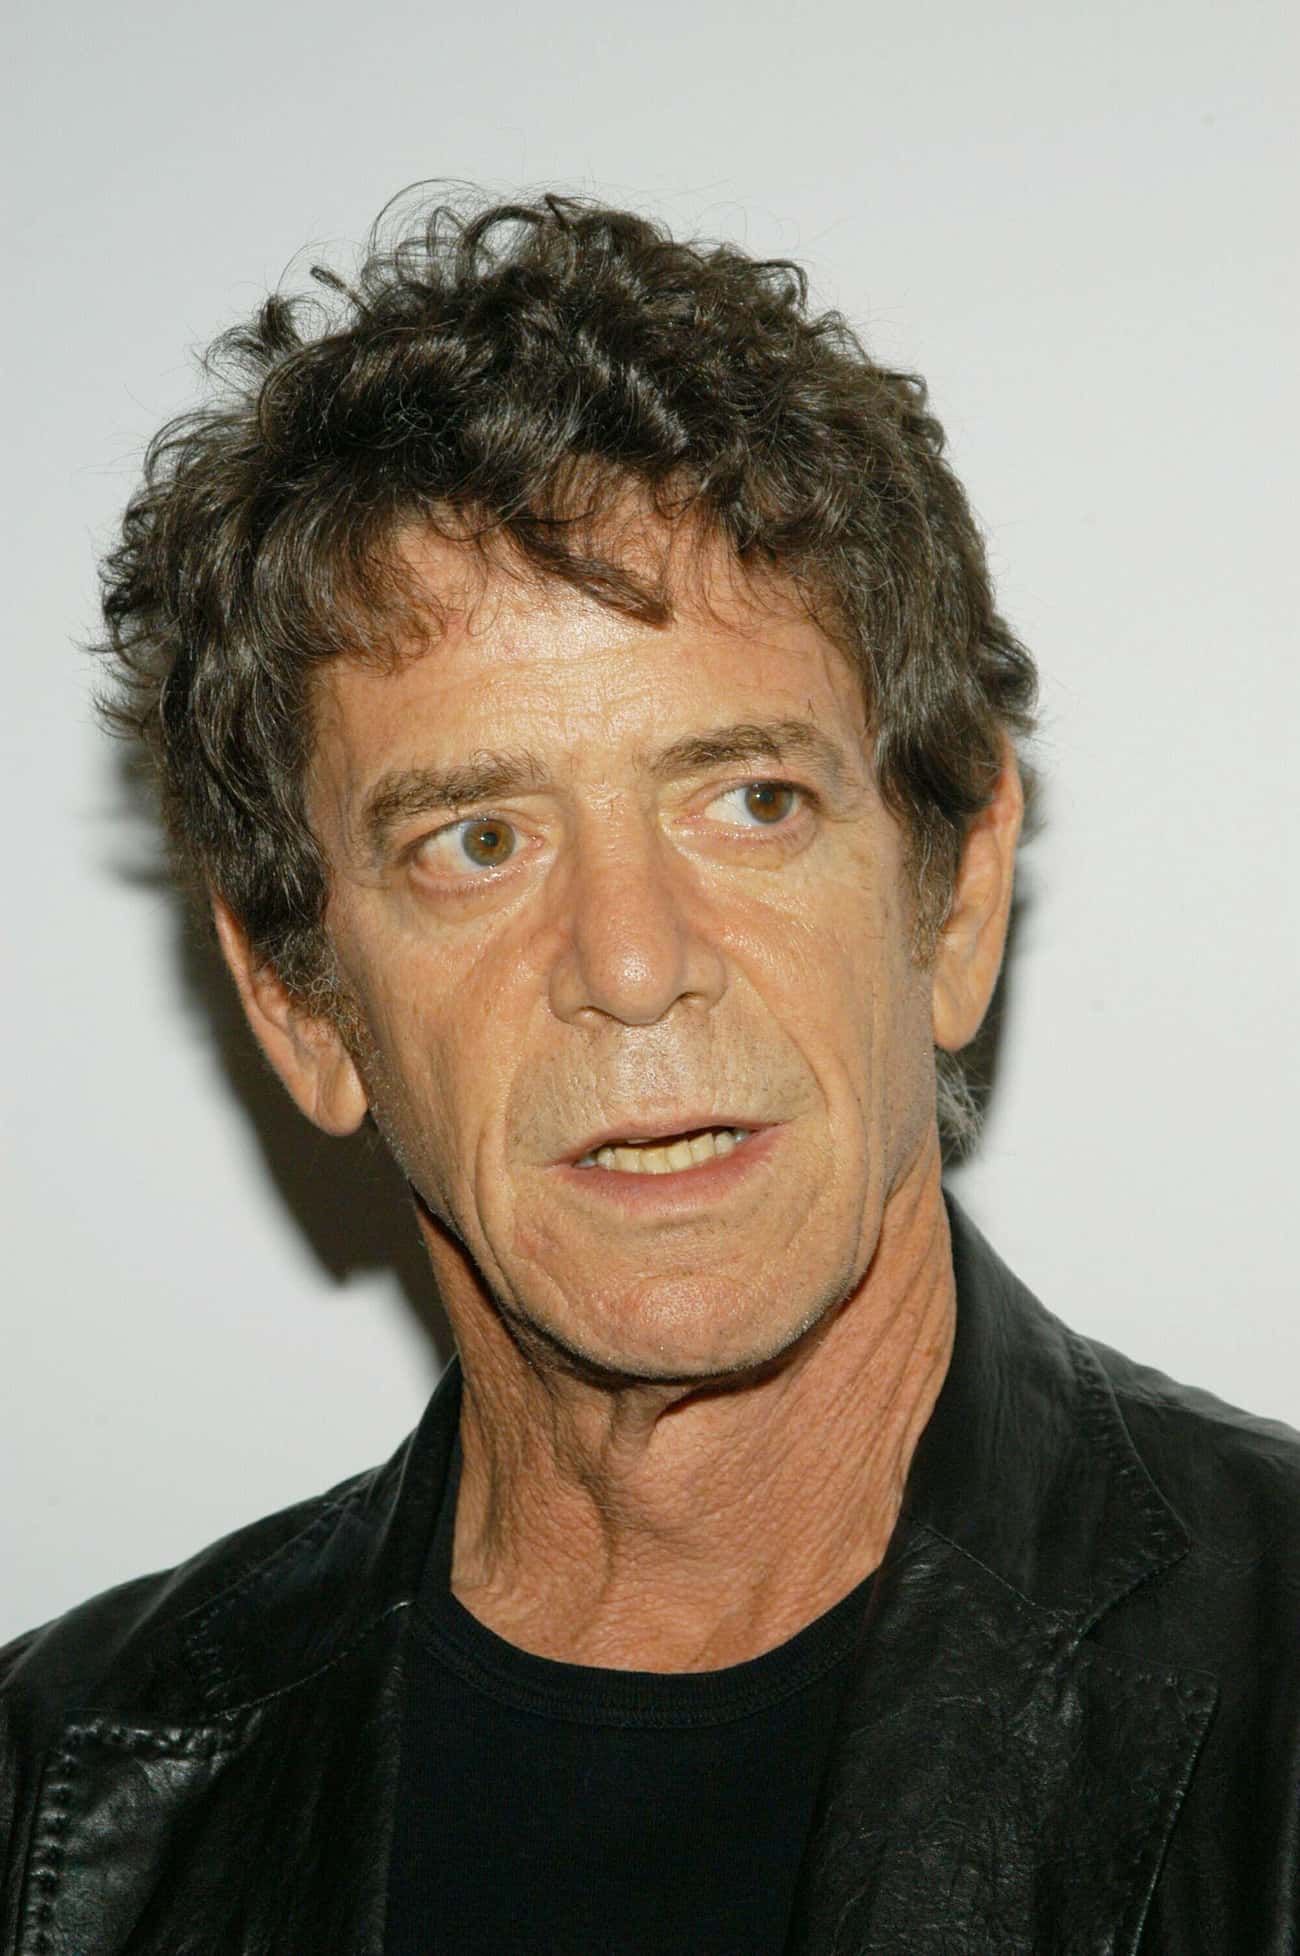 Lou Reed Made Children Cry For A Record (True)